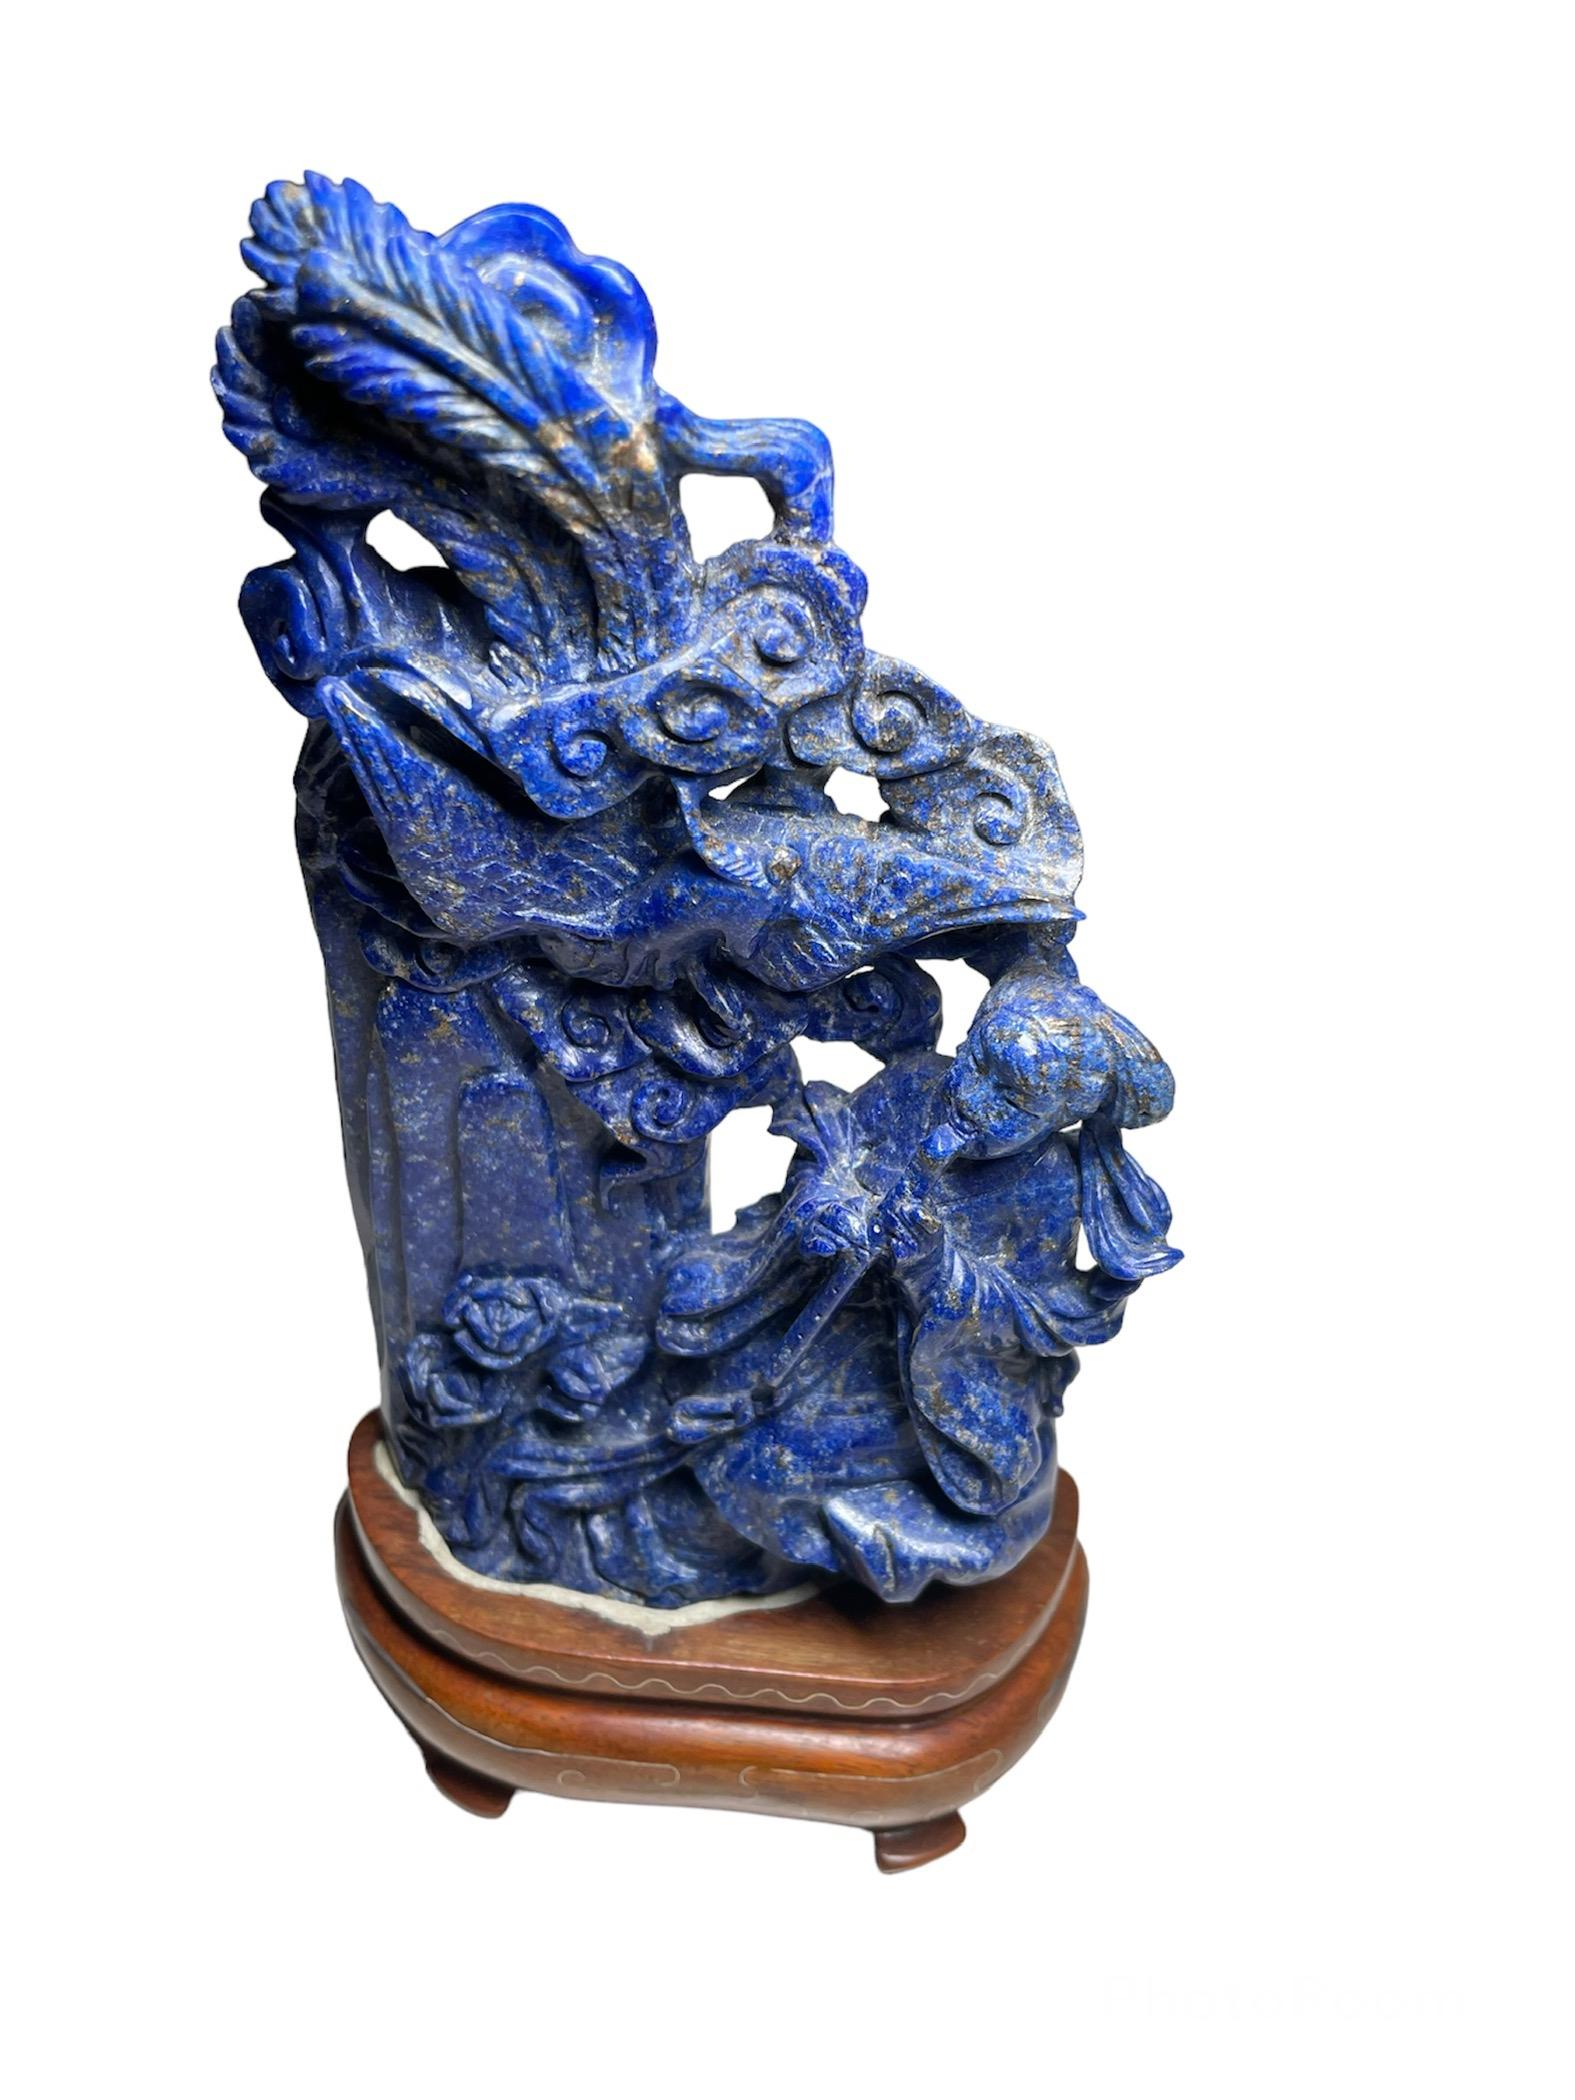 20th Century Chinese Hand Carved Lapis Lazuli Sculptures of the Guan Yin and Phoenix Bird For Sale